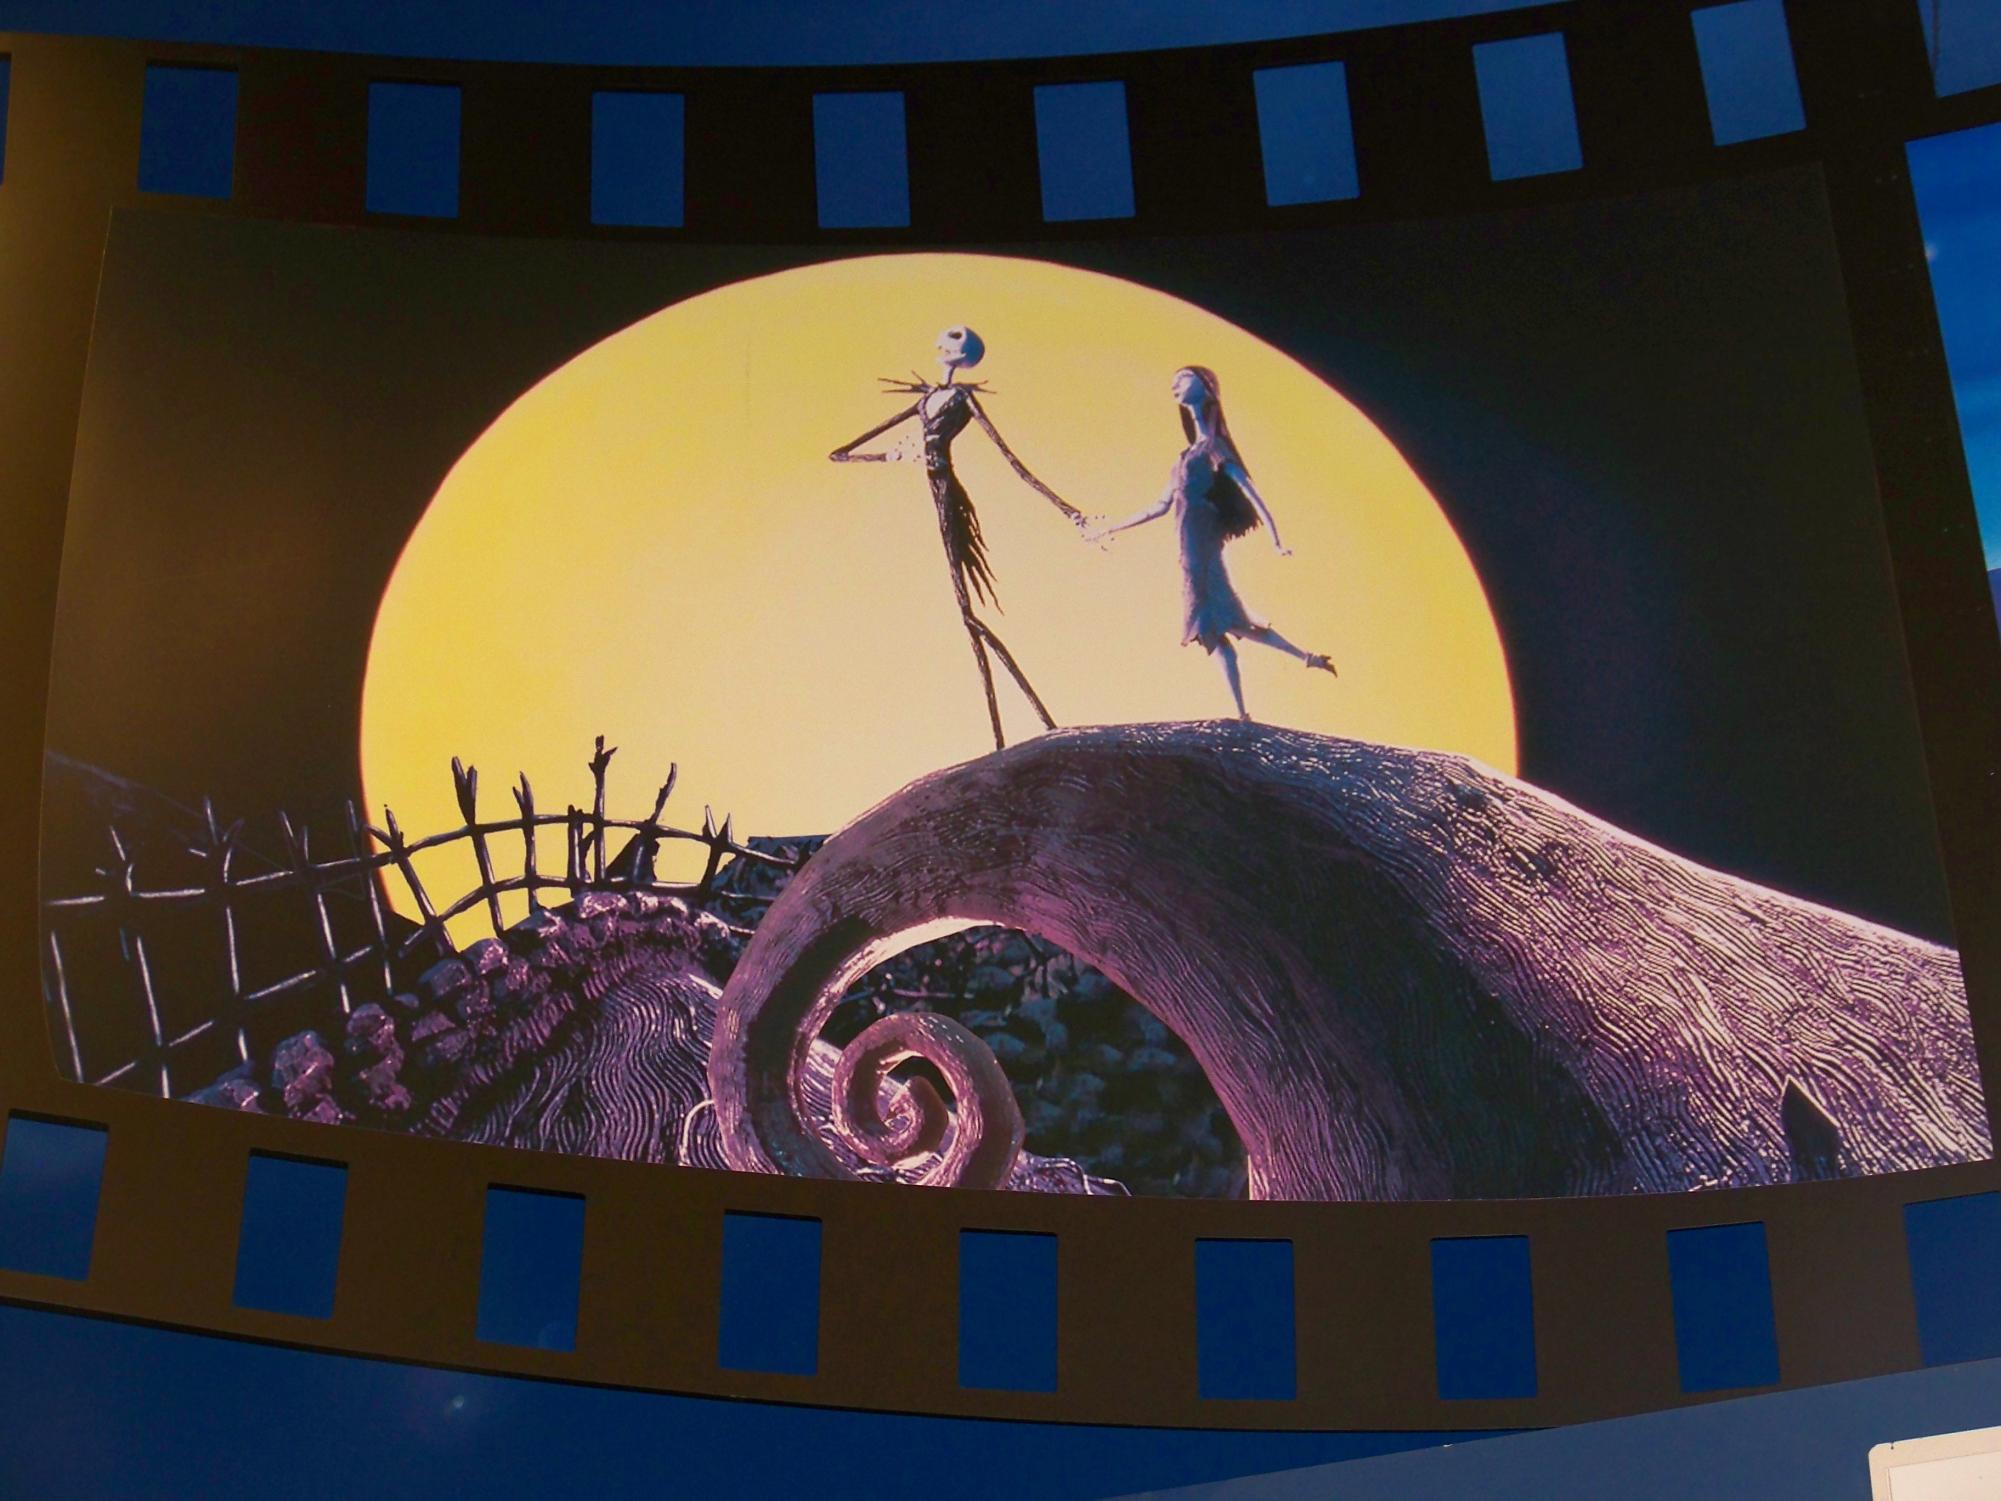 The Nightmare Before Christmas is a well known stop-motion musical fantasy movie released in 1993 created by Tim Burton.